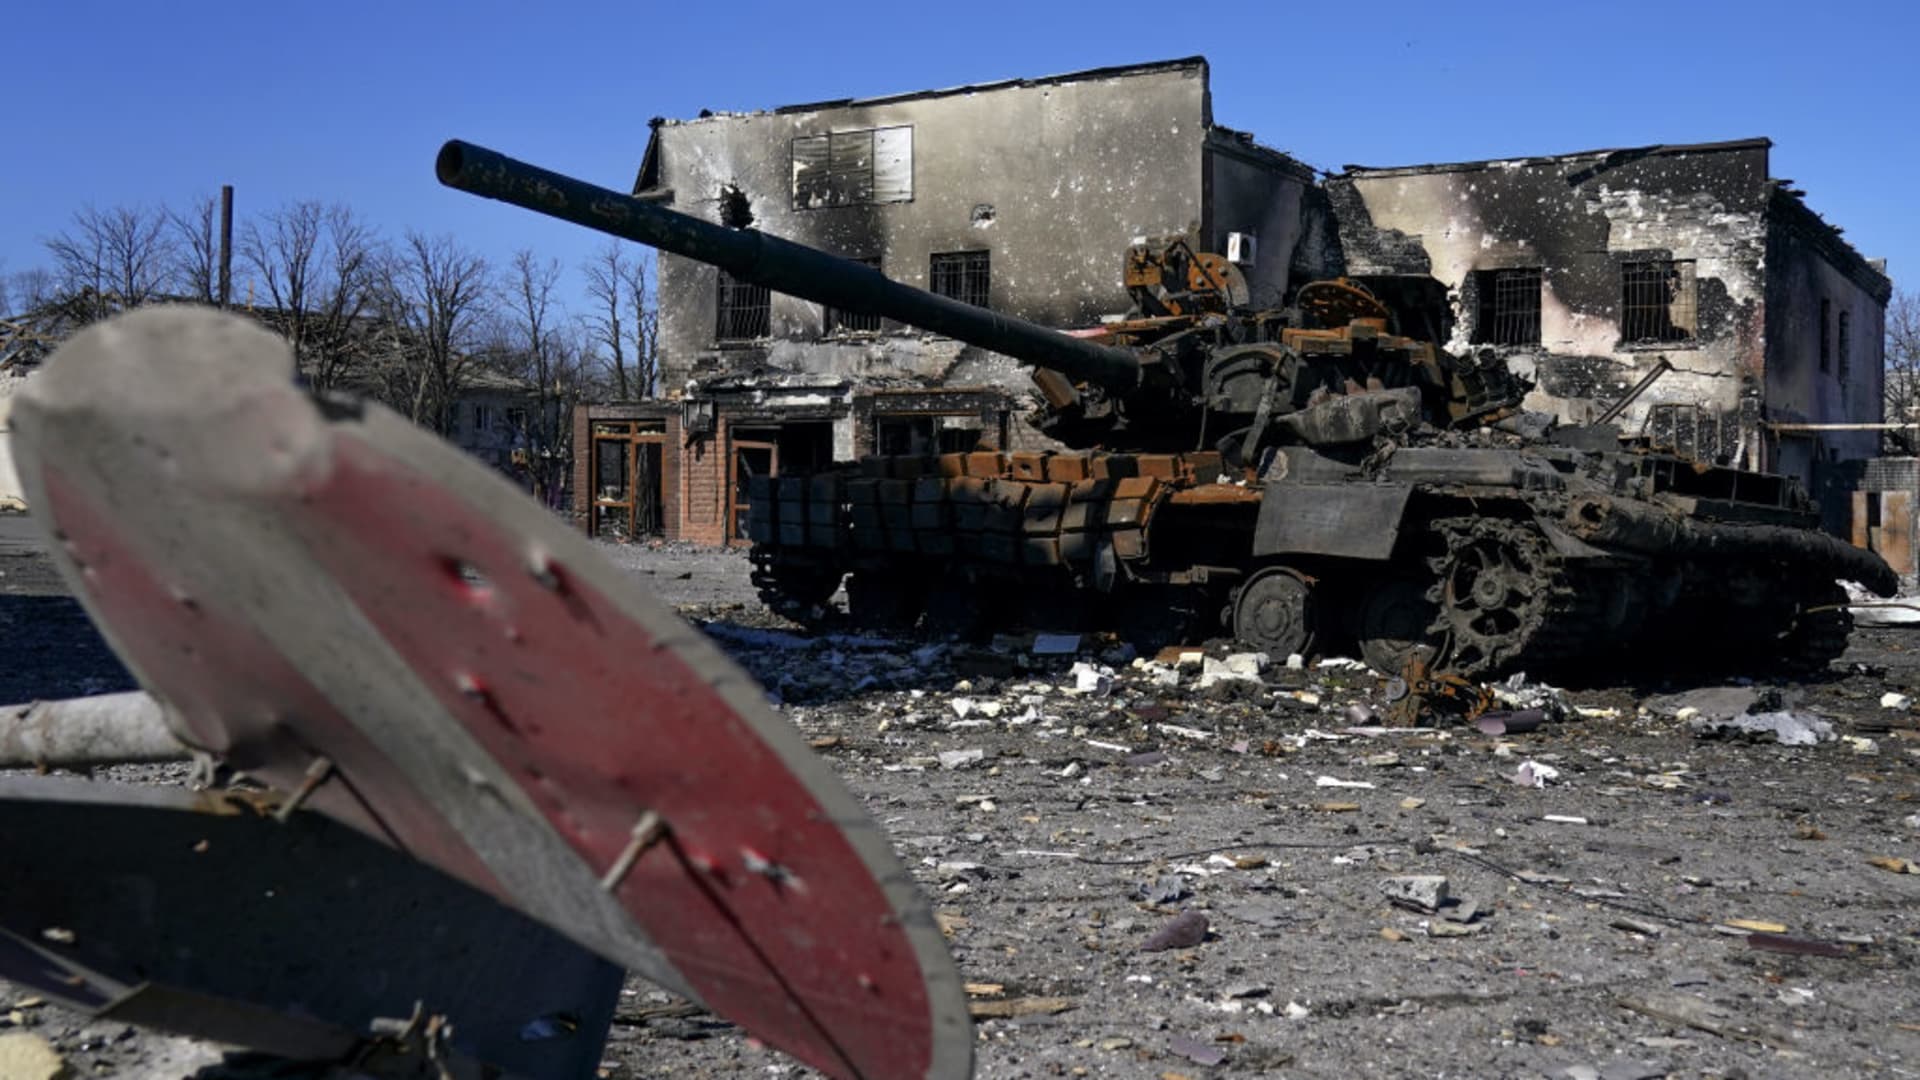 Up to 40,000 Russian soldiers killed, wounded, captured or MIA in Ukraine, NATO estimates